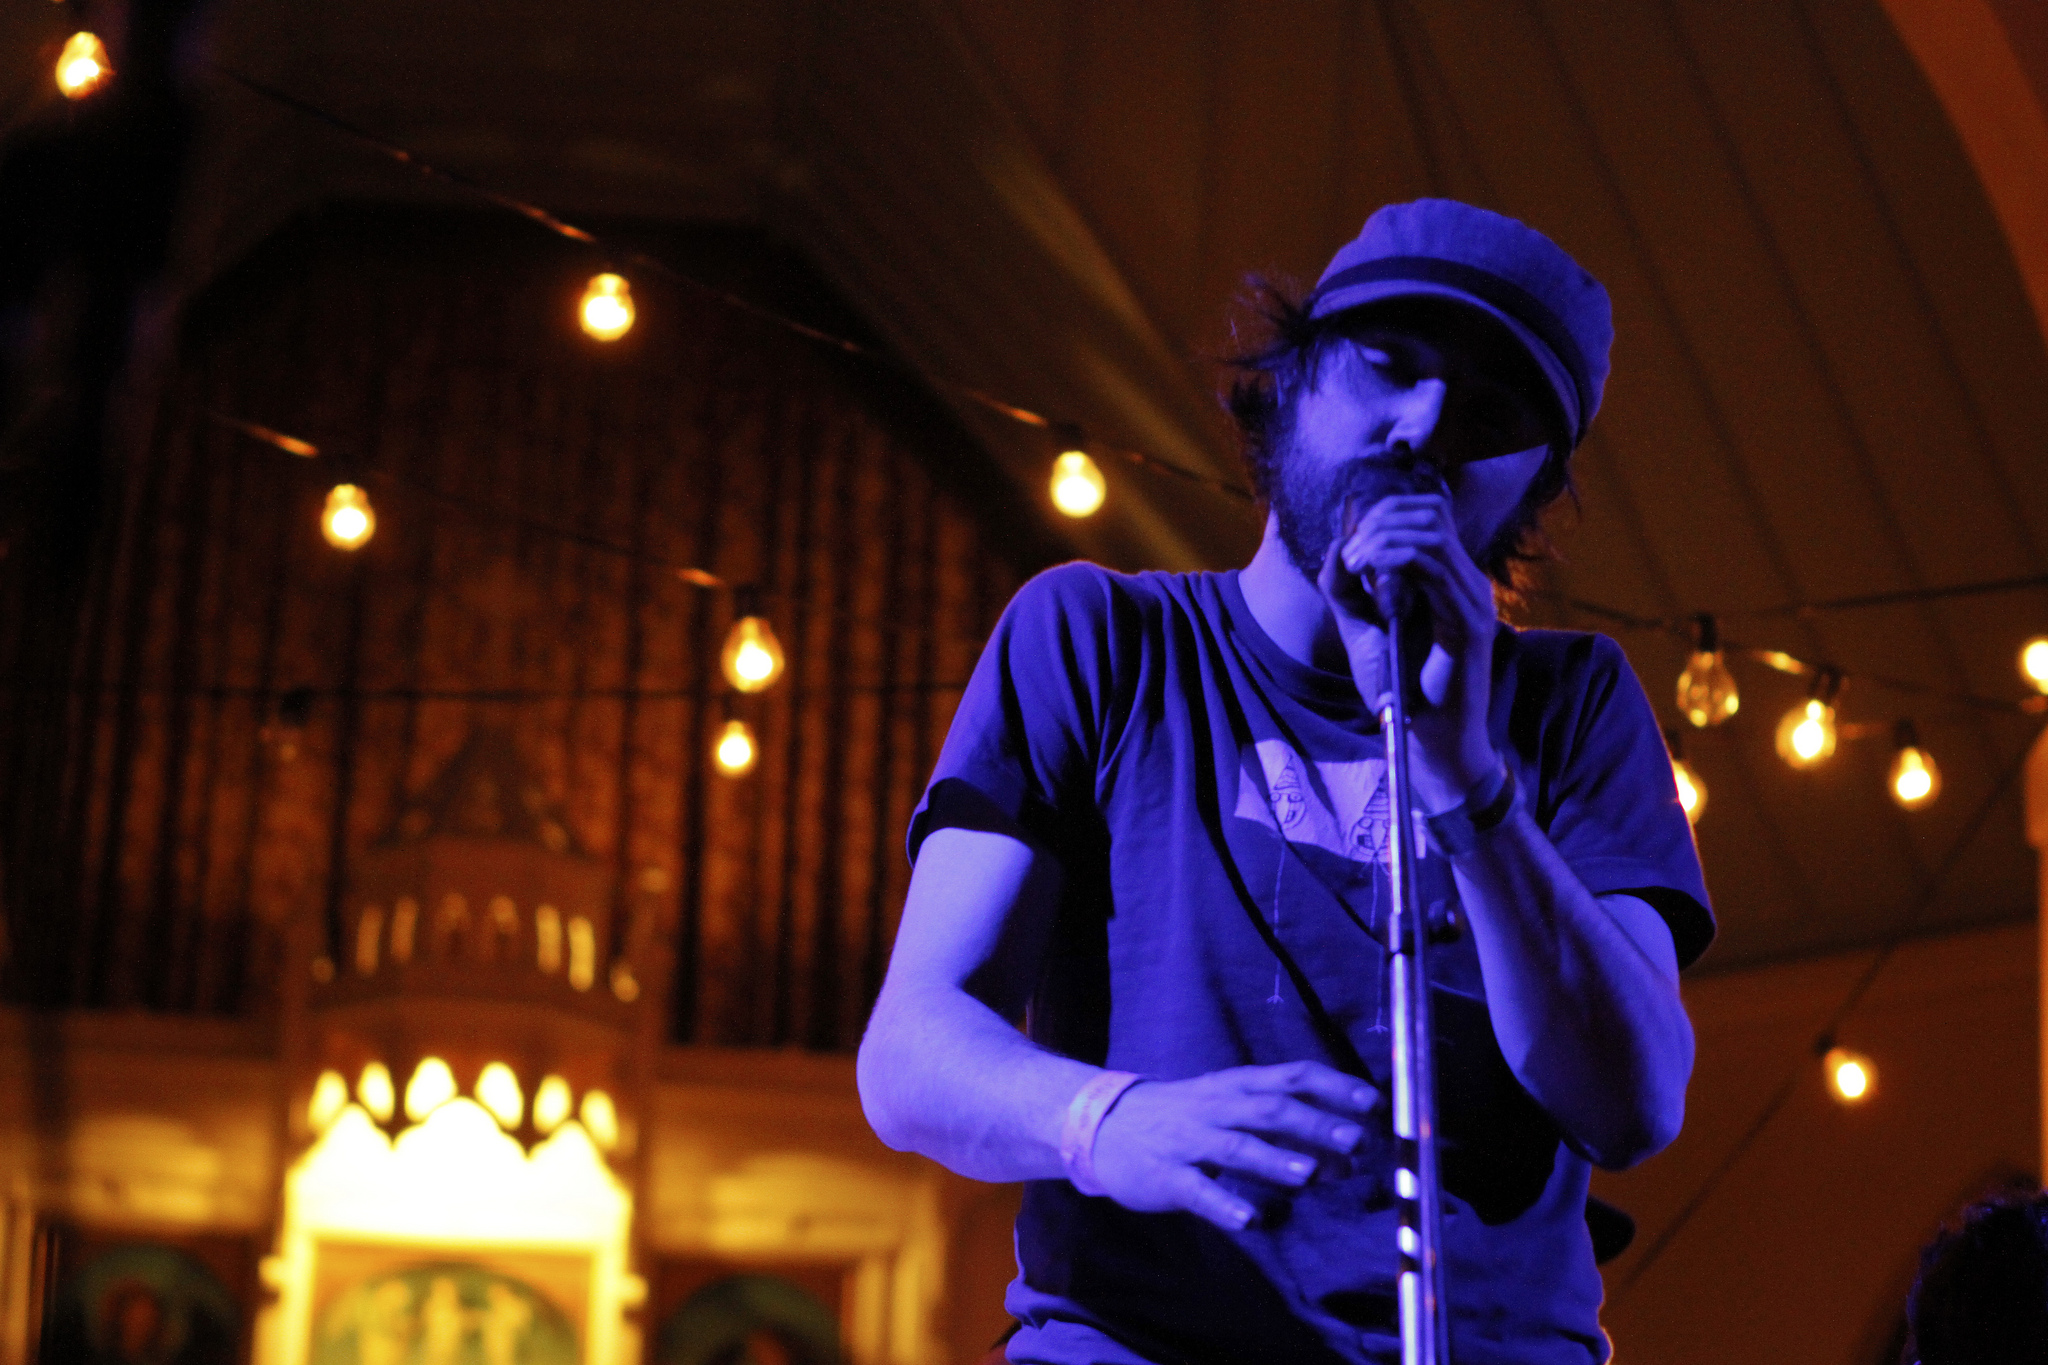 Patrick Watson performs at St. David's Episcopal Church during South By Southwest in Austin, Texas on March 15, 2012.